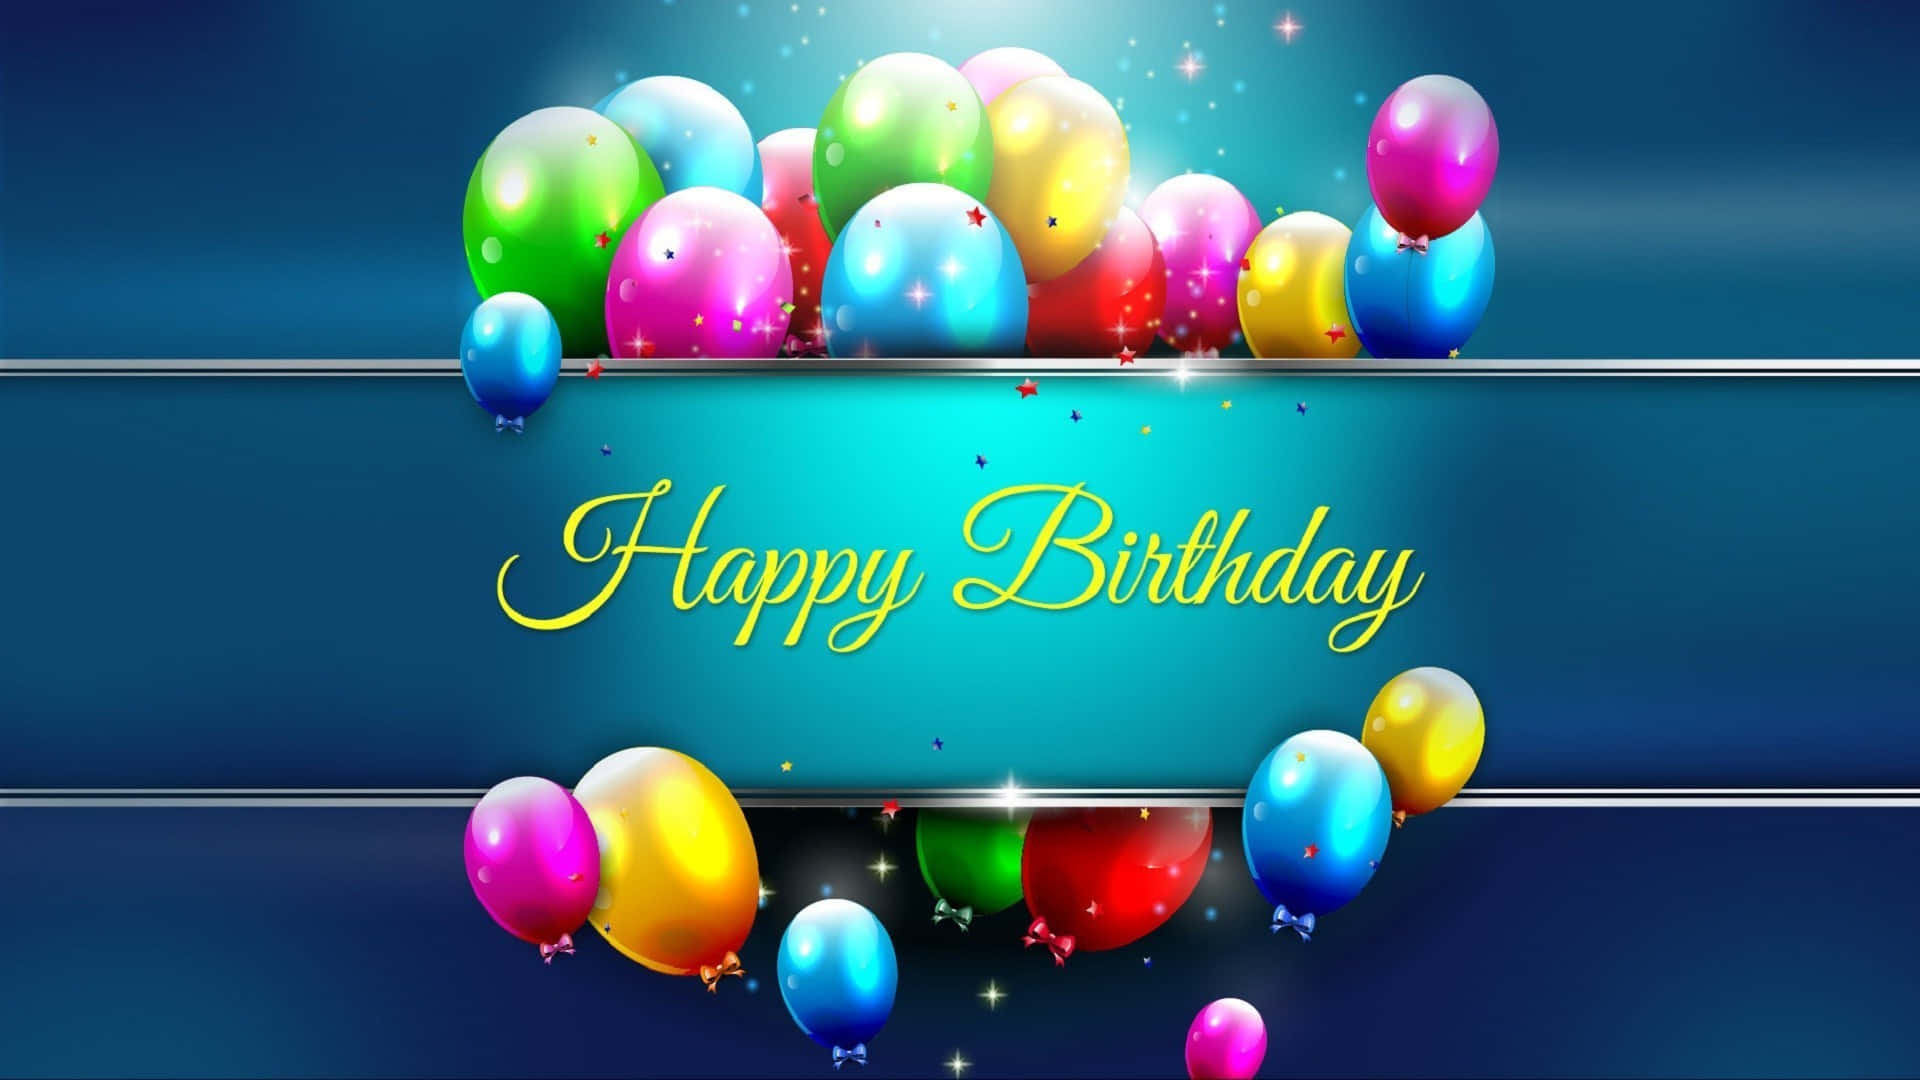 A colorful and joyful High Resolution Happy Birthday background